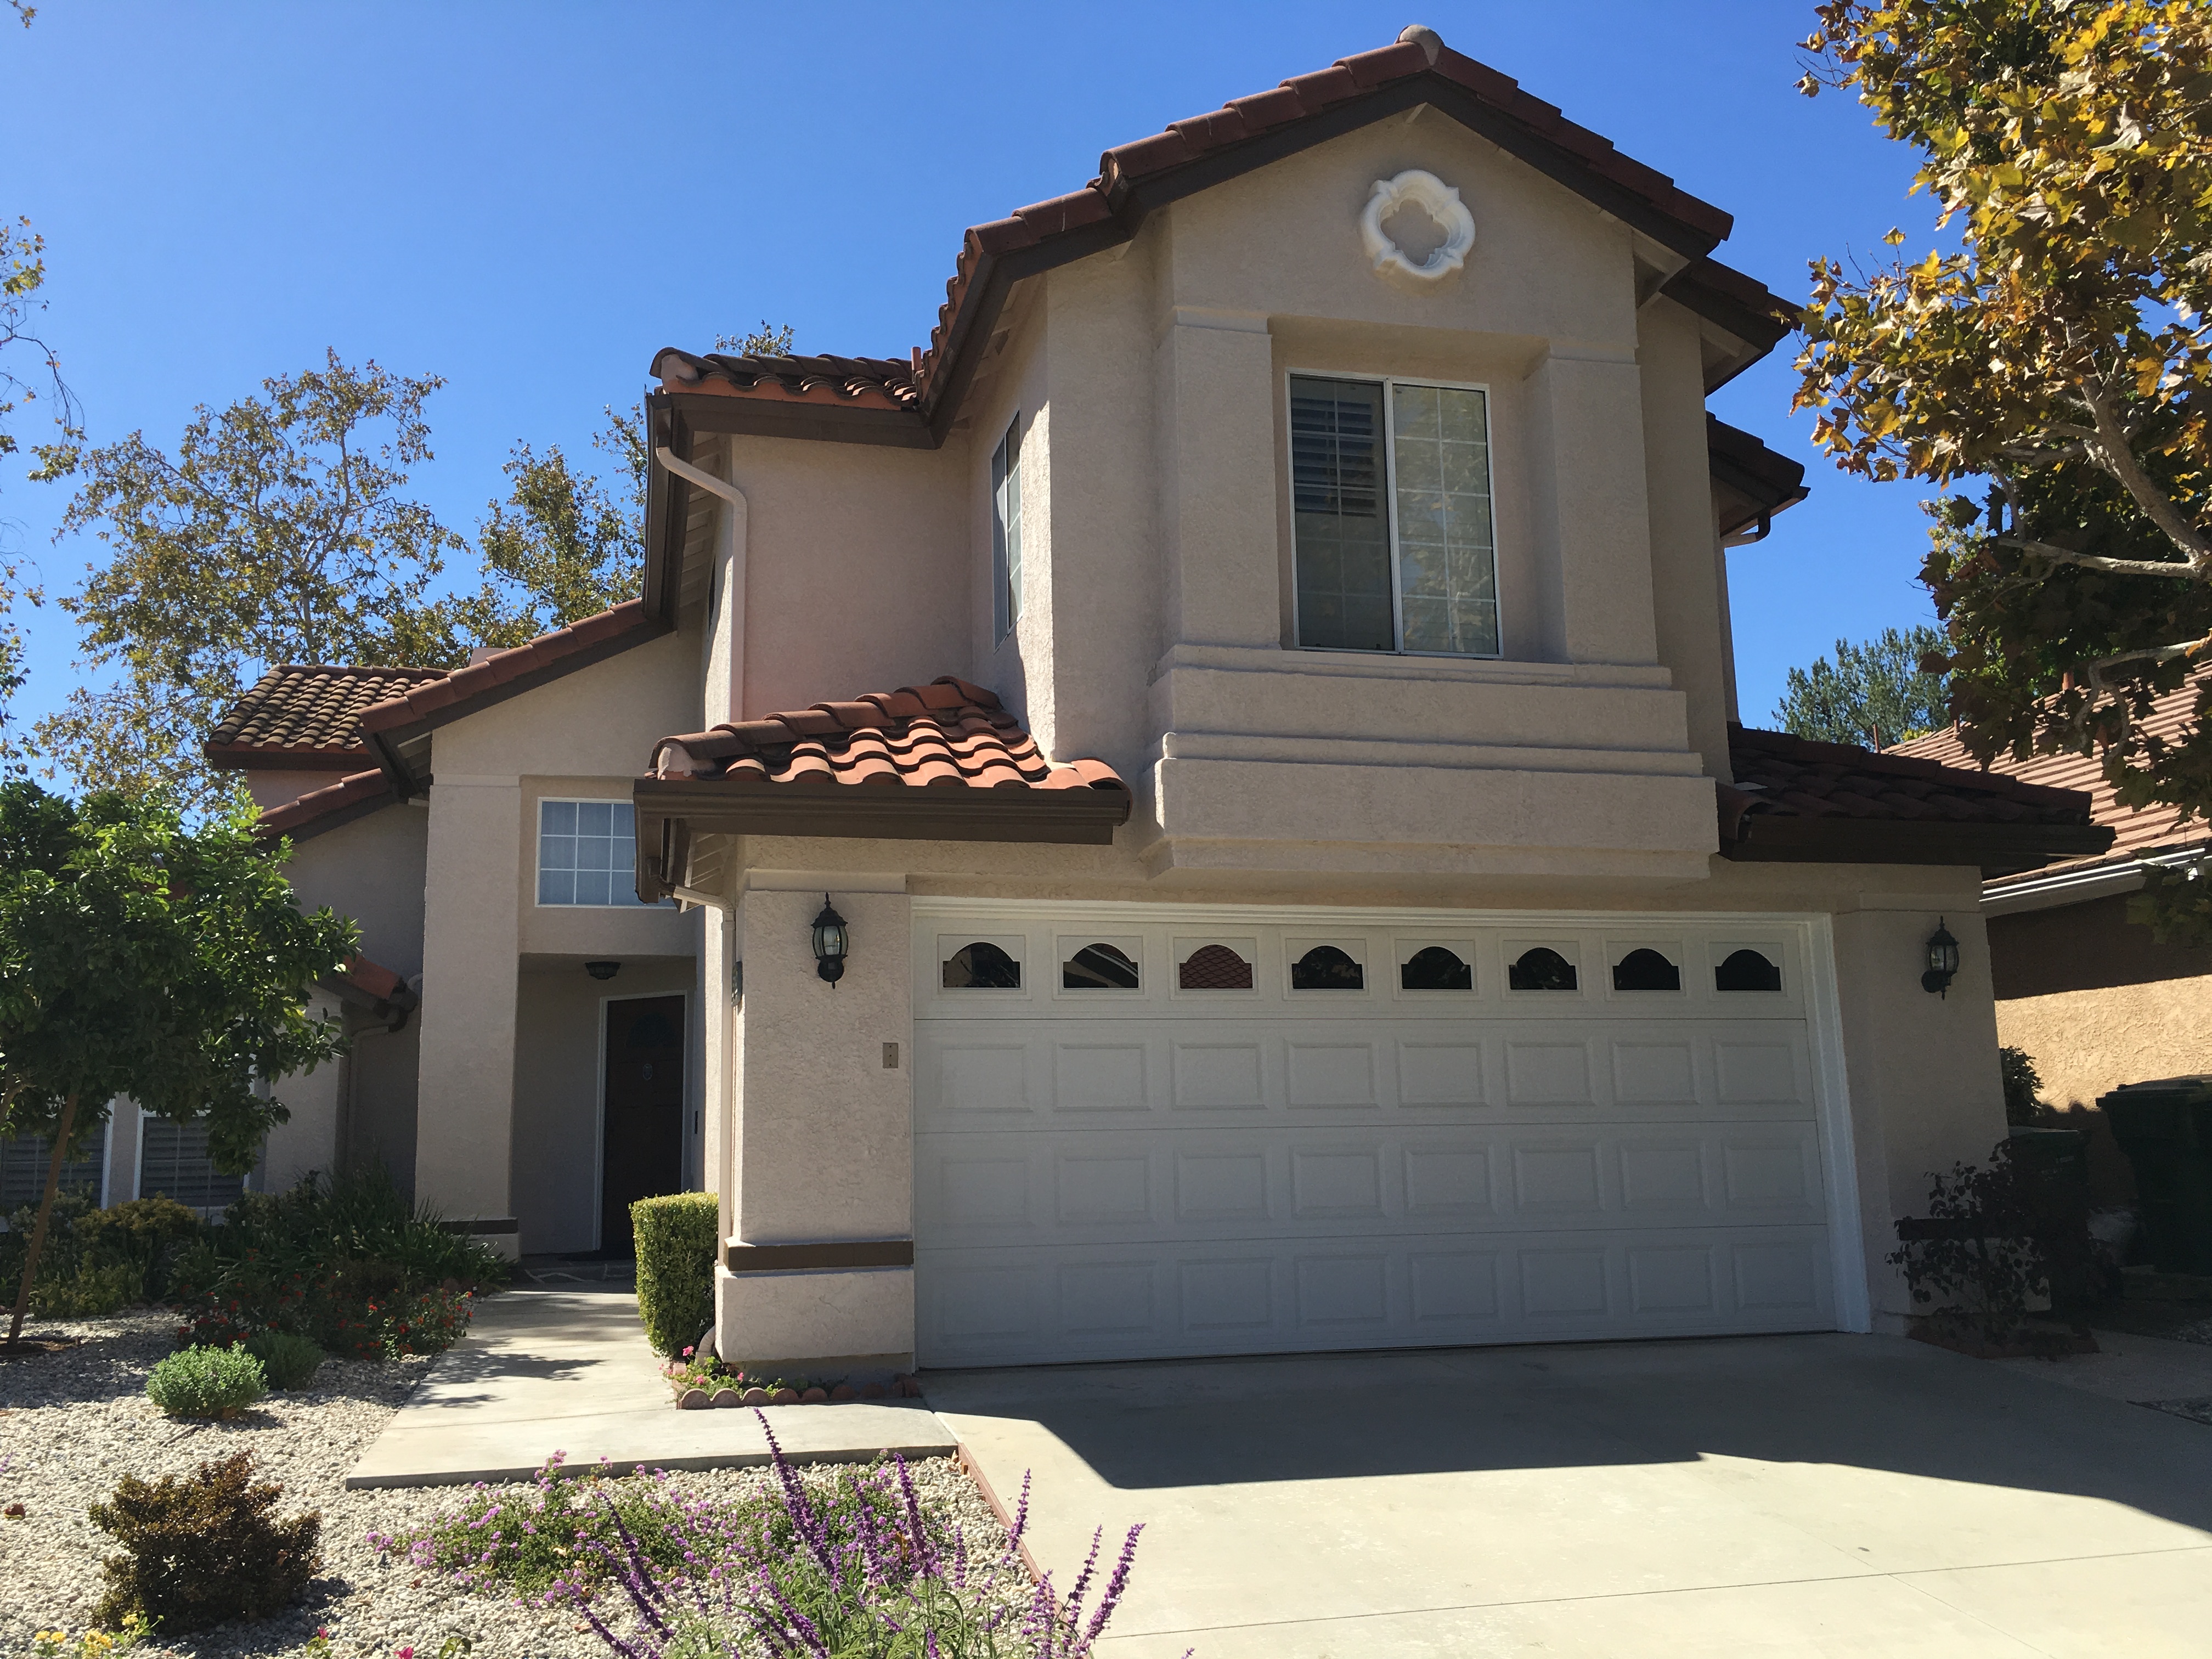 CertaPro Painters in Thousand Oaks, CA. are your Exterior painting experts